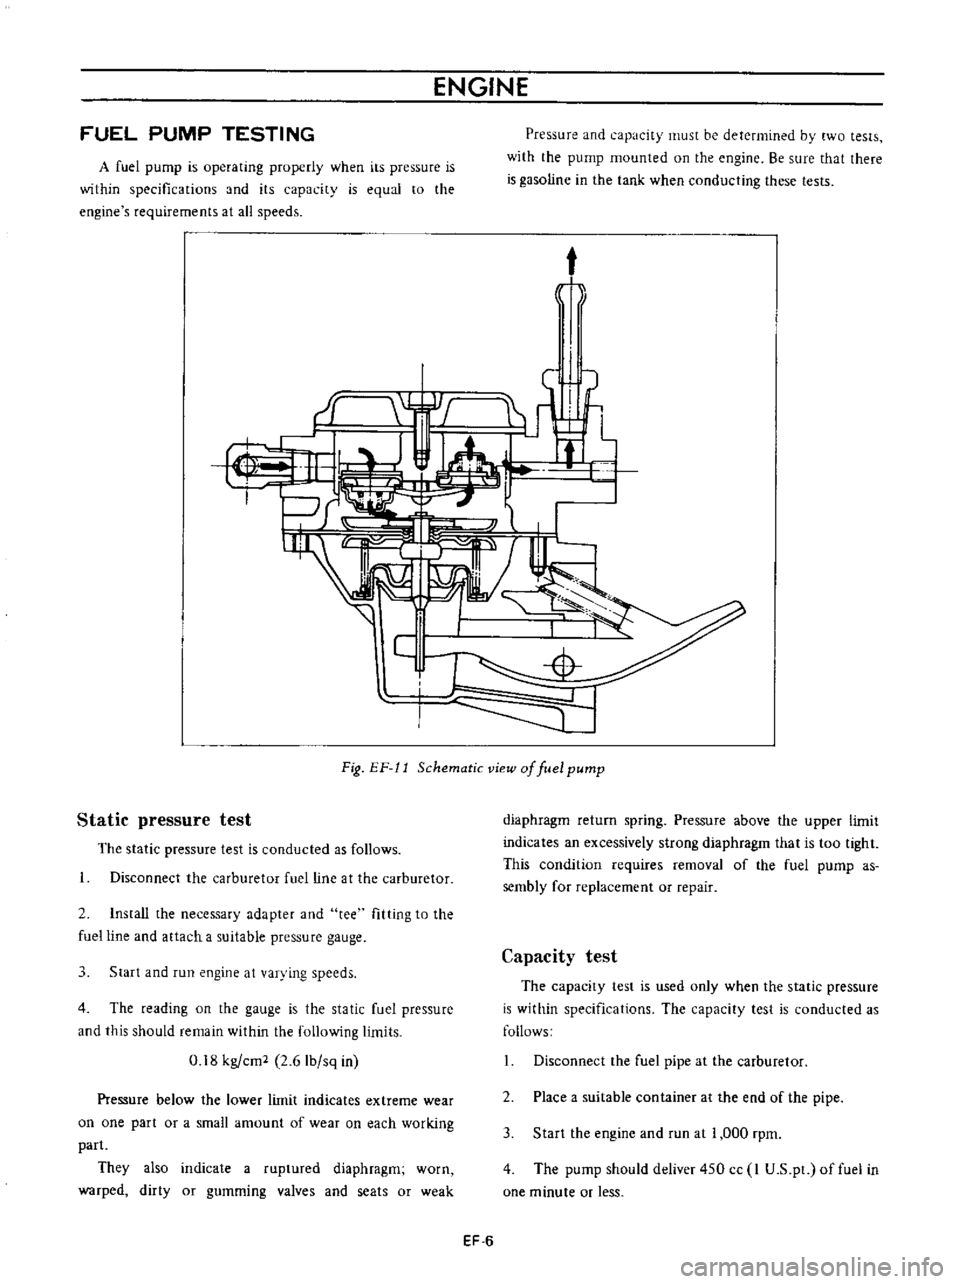 DATSUN B110 1973  Service Repair Manual 
ENGINE

FUEL 
PUMP

TESTING

A 
fuel

pump 
is

operating 
properly 
when 
its

pressure 
is

within

specifications 
and 
its

capacity 
is

equal 
to 
the

engine 
5

requirements 
at 
all

speeds 